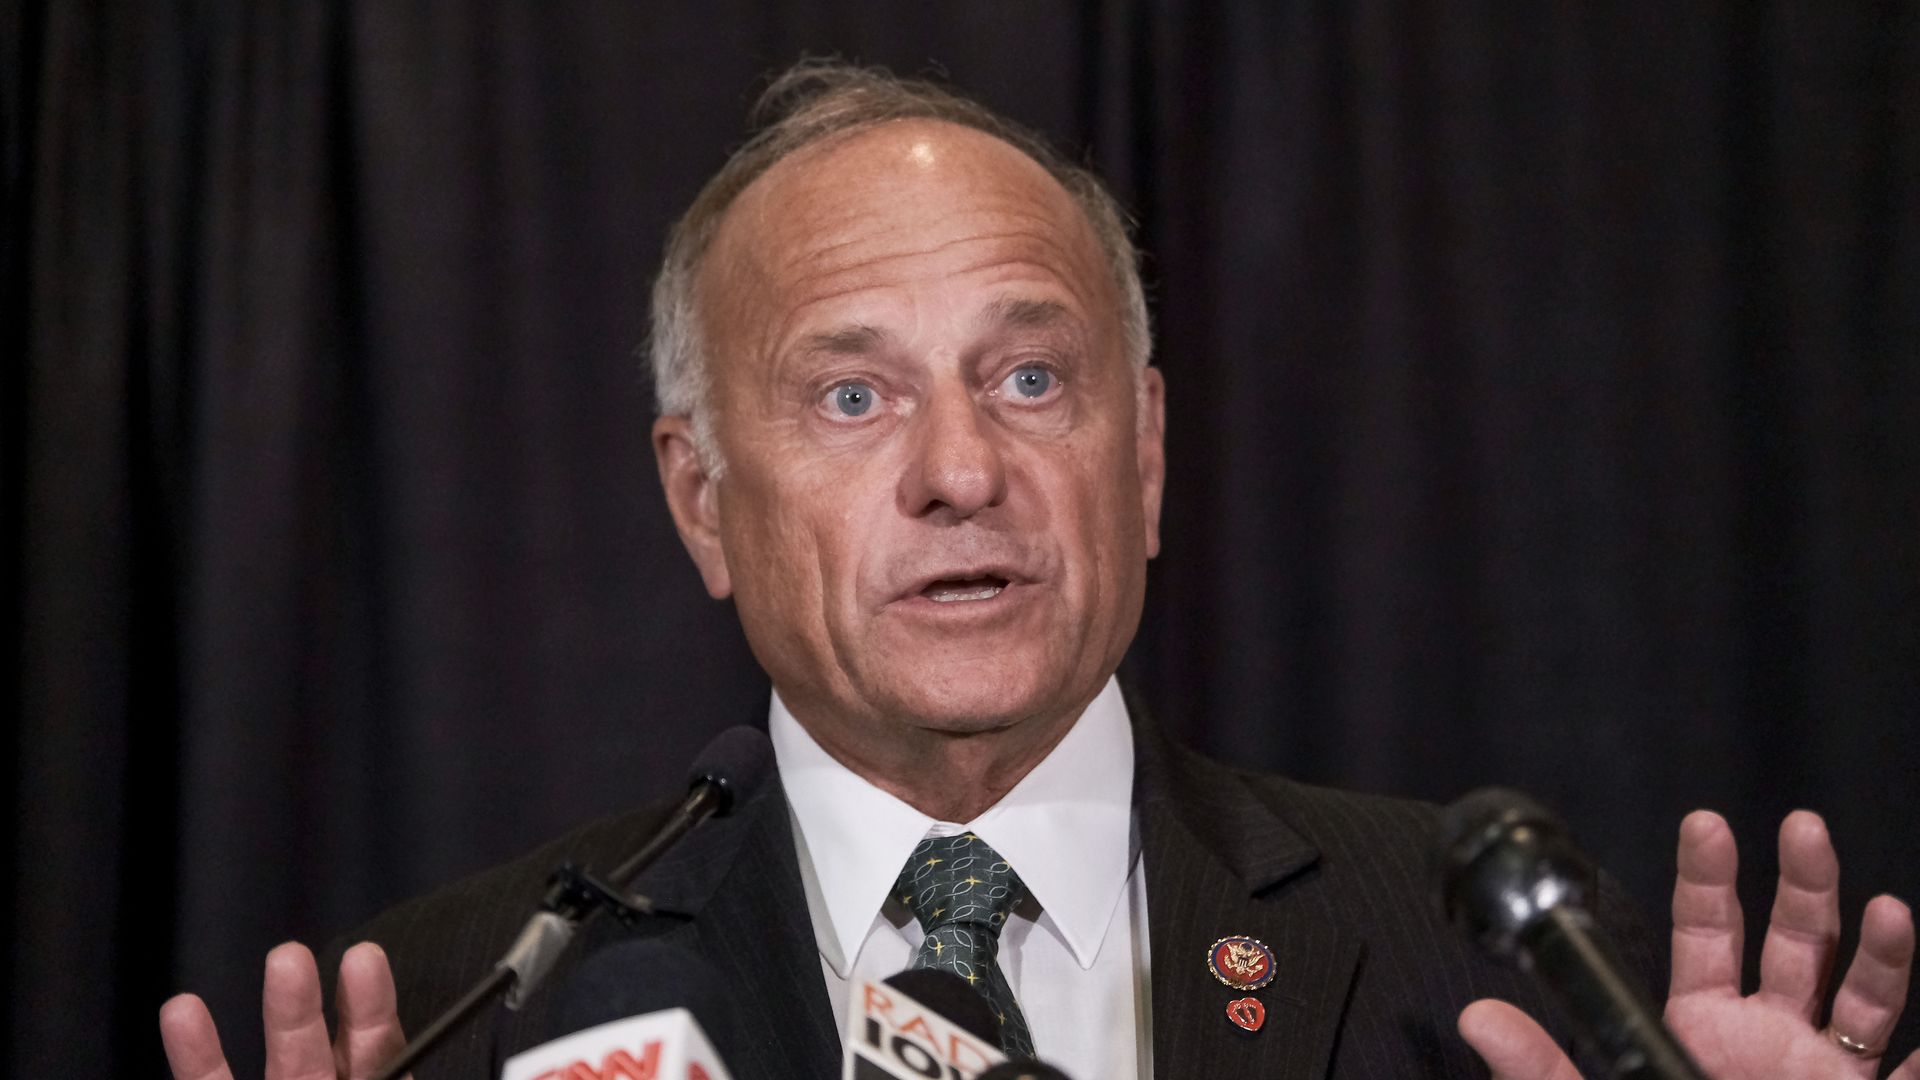  Rep. Steve King (R-IA) speaks at a press conference on abortion legislation on August 23